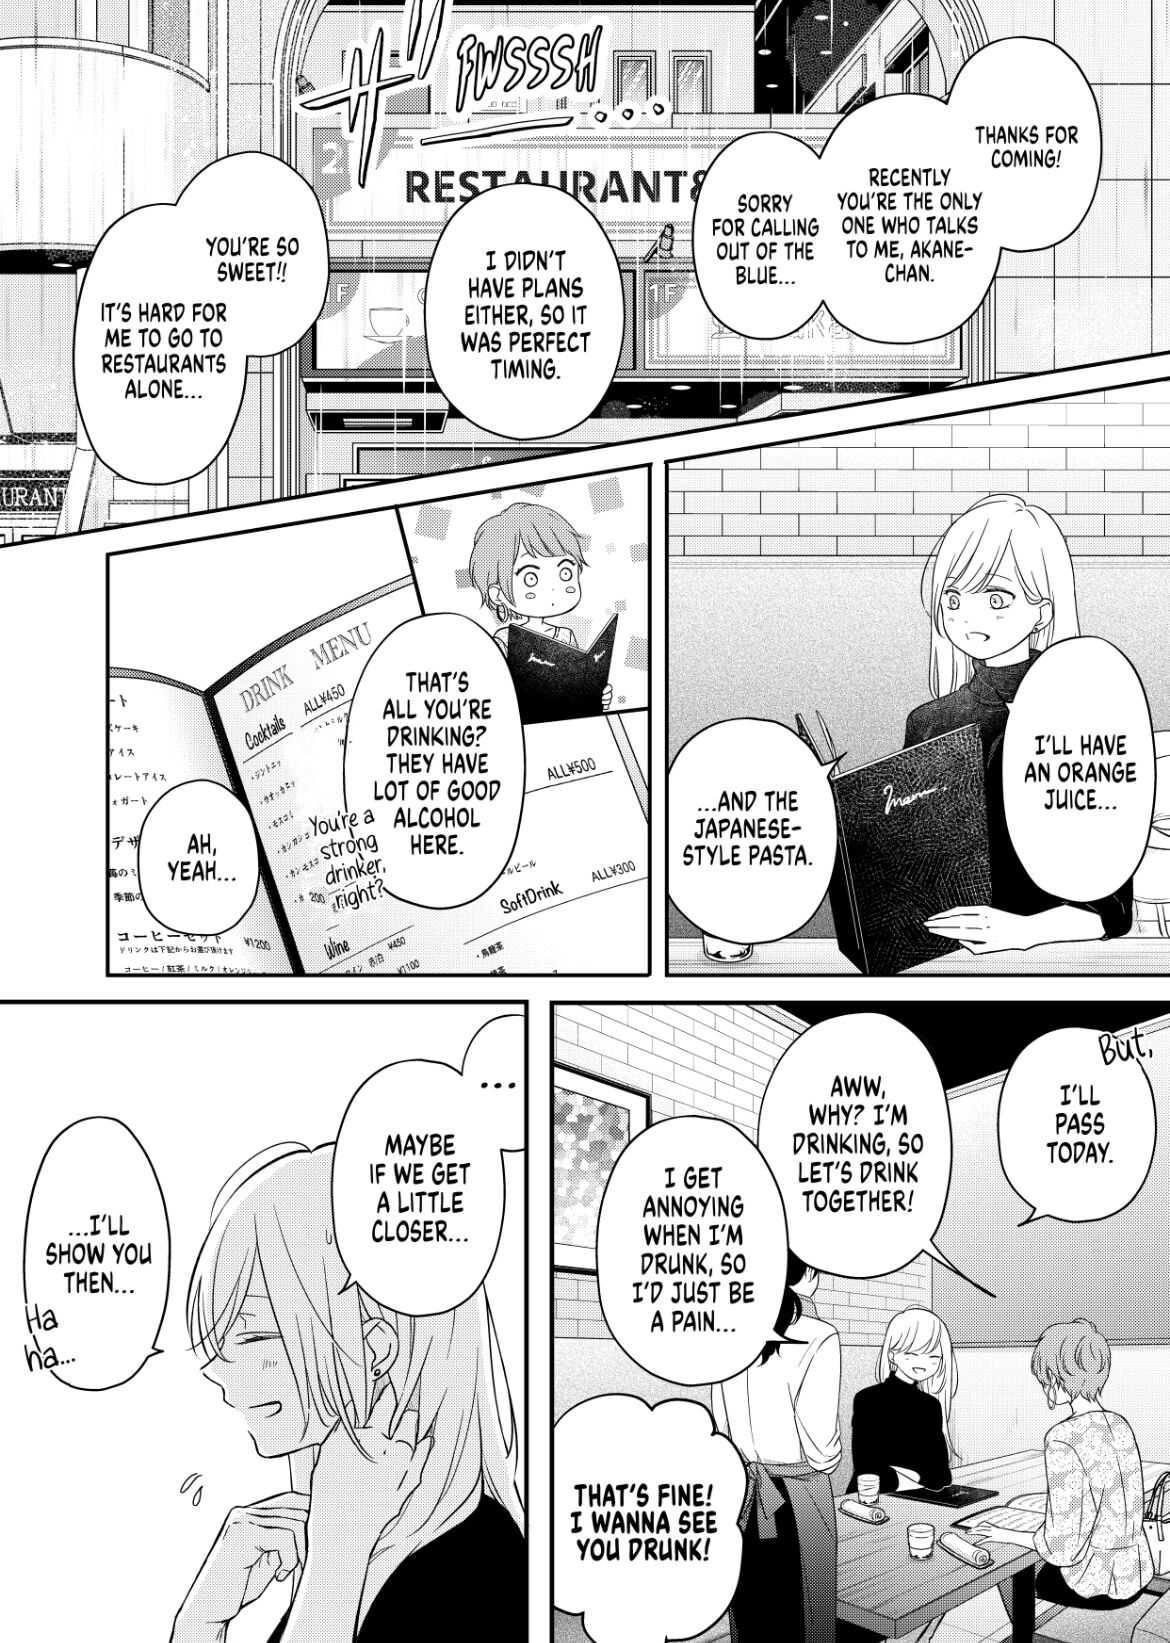 Chapter 49, My Love Story with Yamada-kun at Lv999